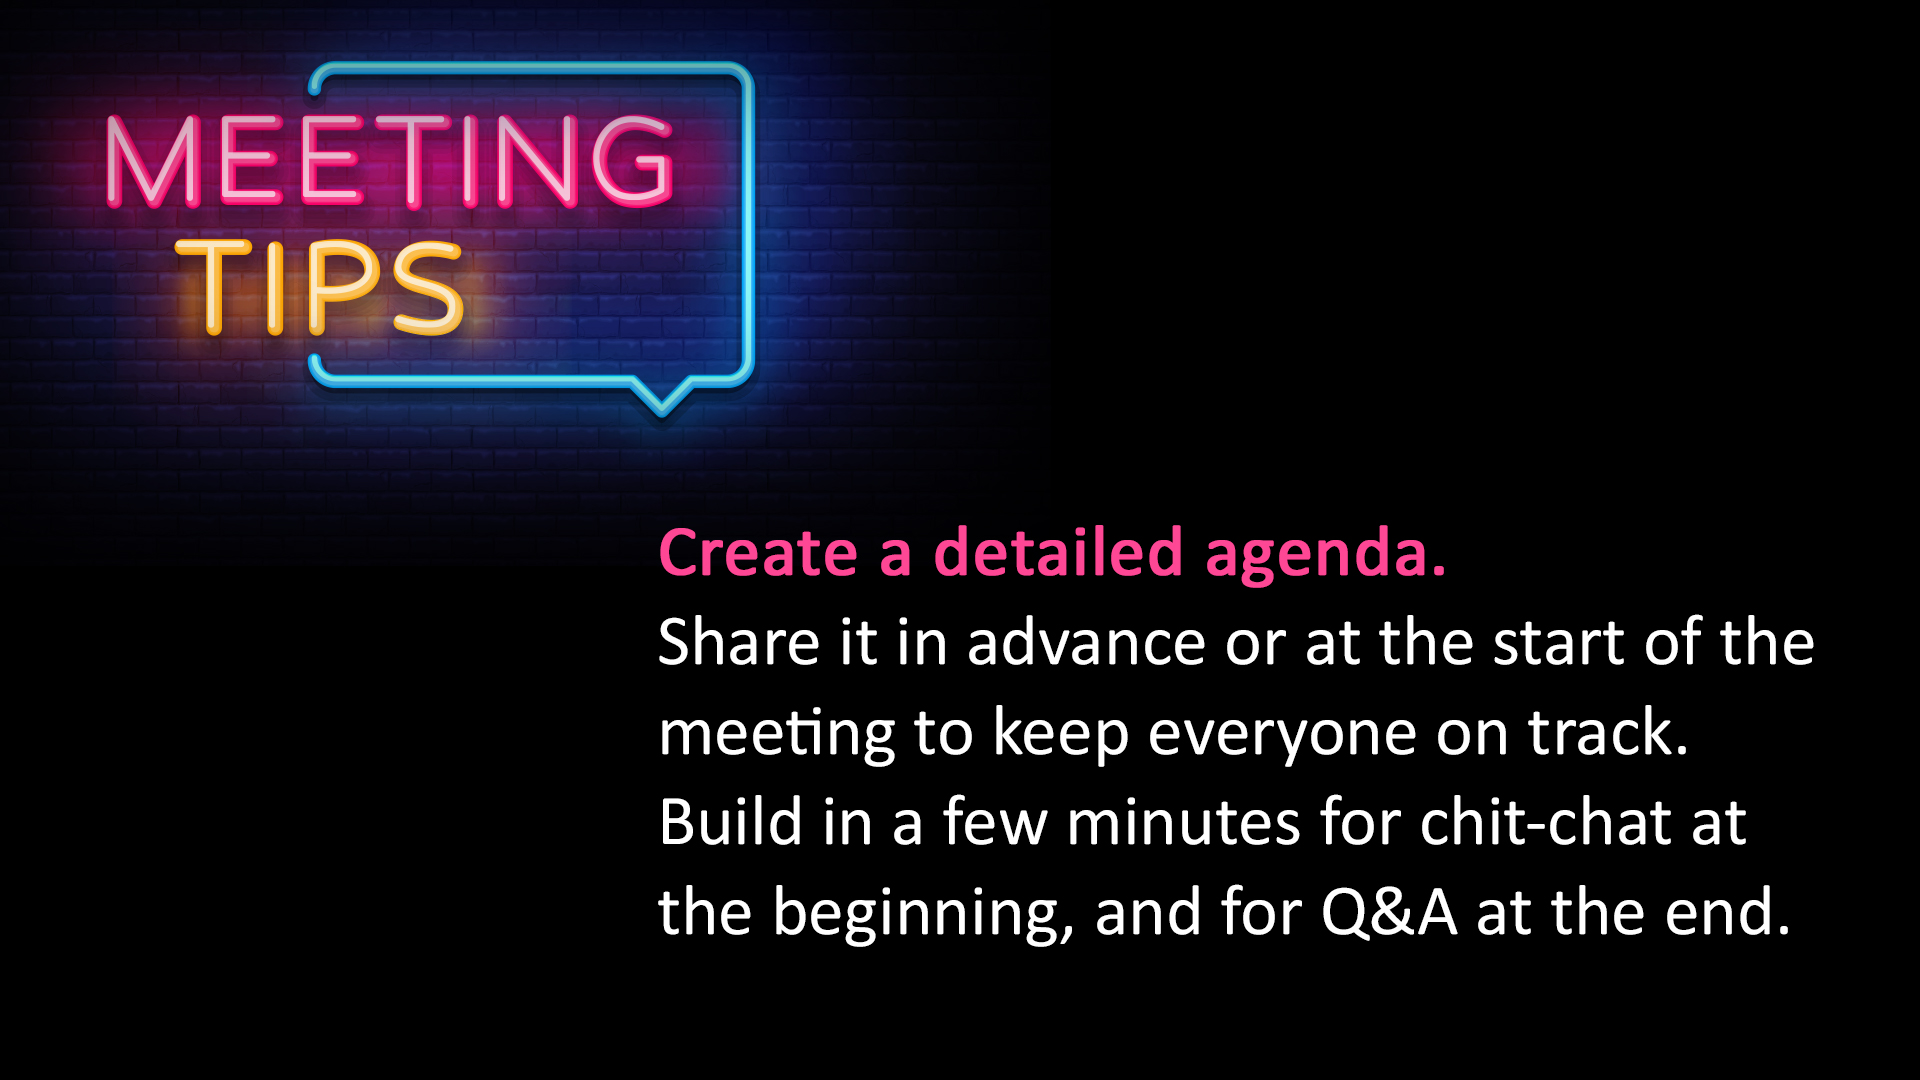 Free Graphic | Meeting Tips | Create a detailed agenda